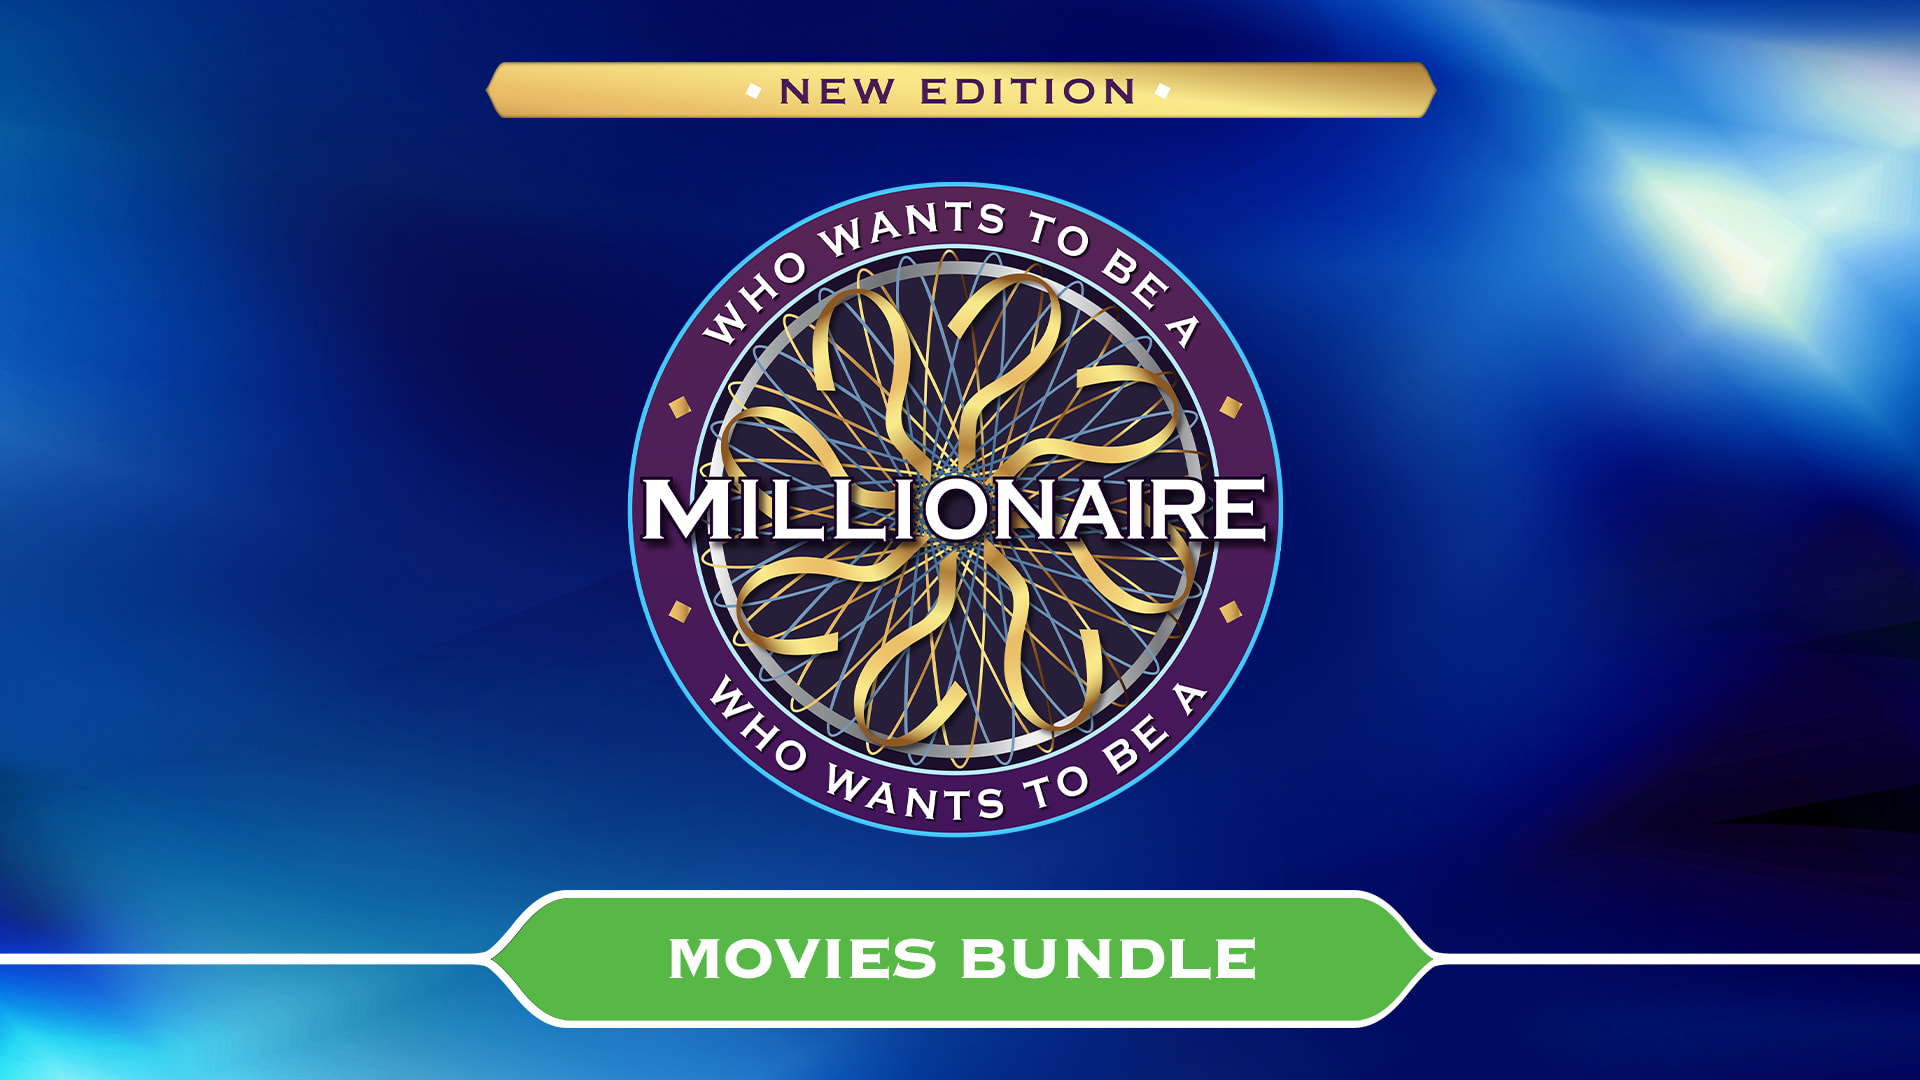 Who Wants to Be a Millionaire? - Movies Bundle